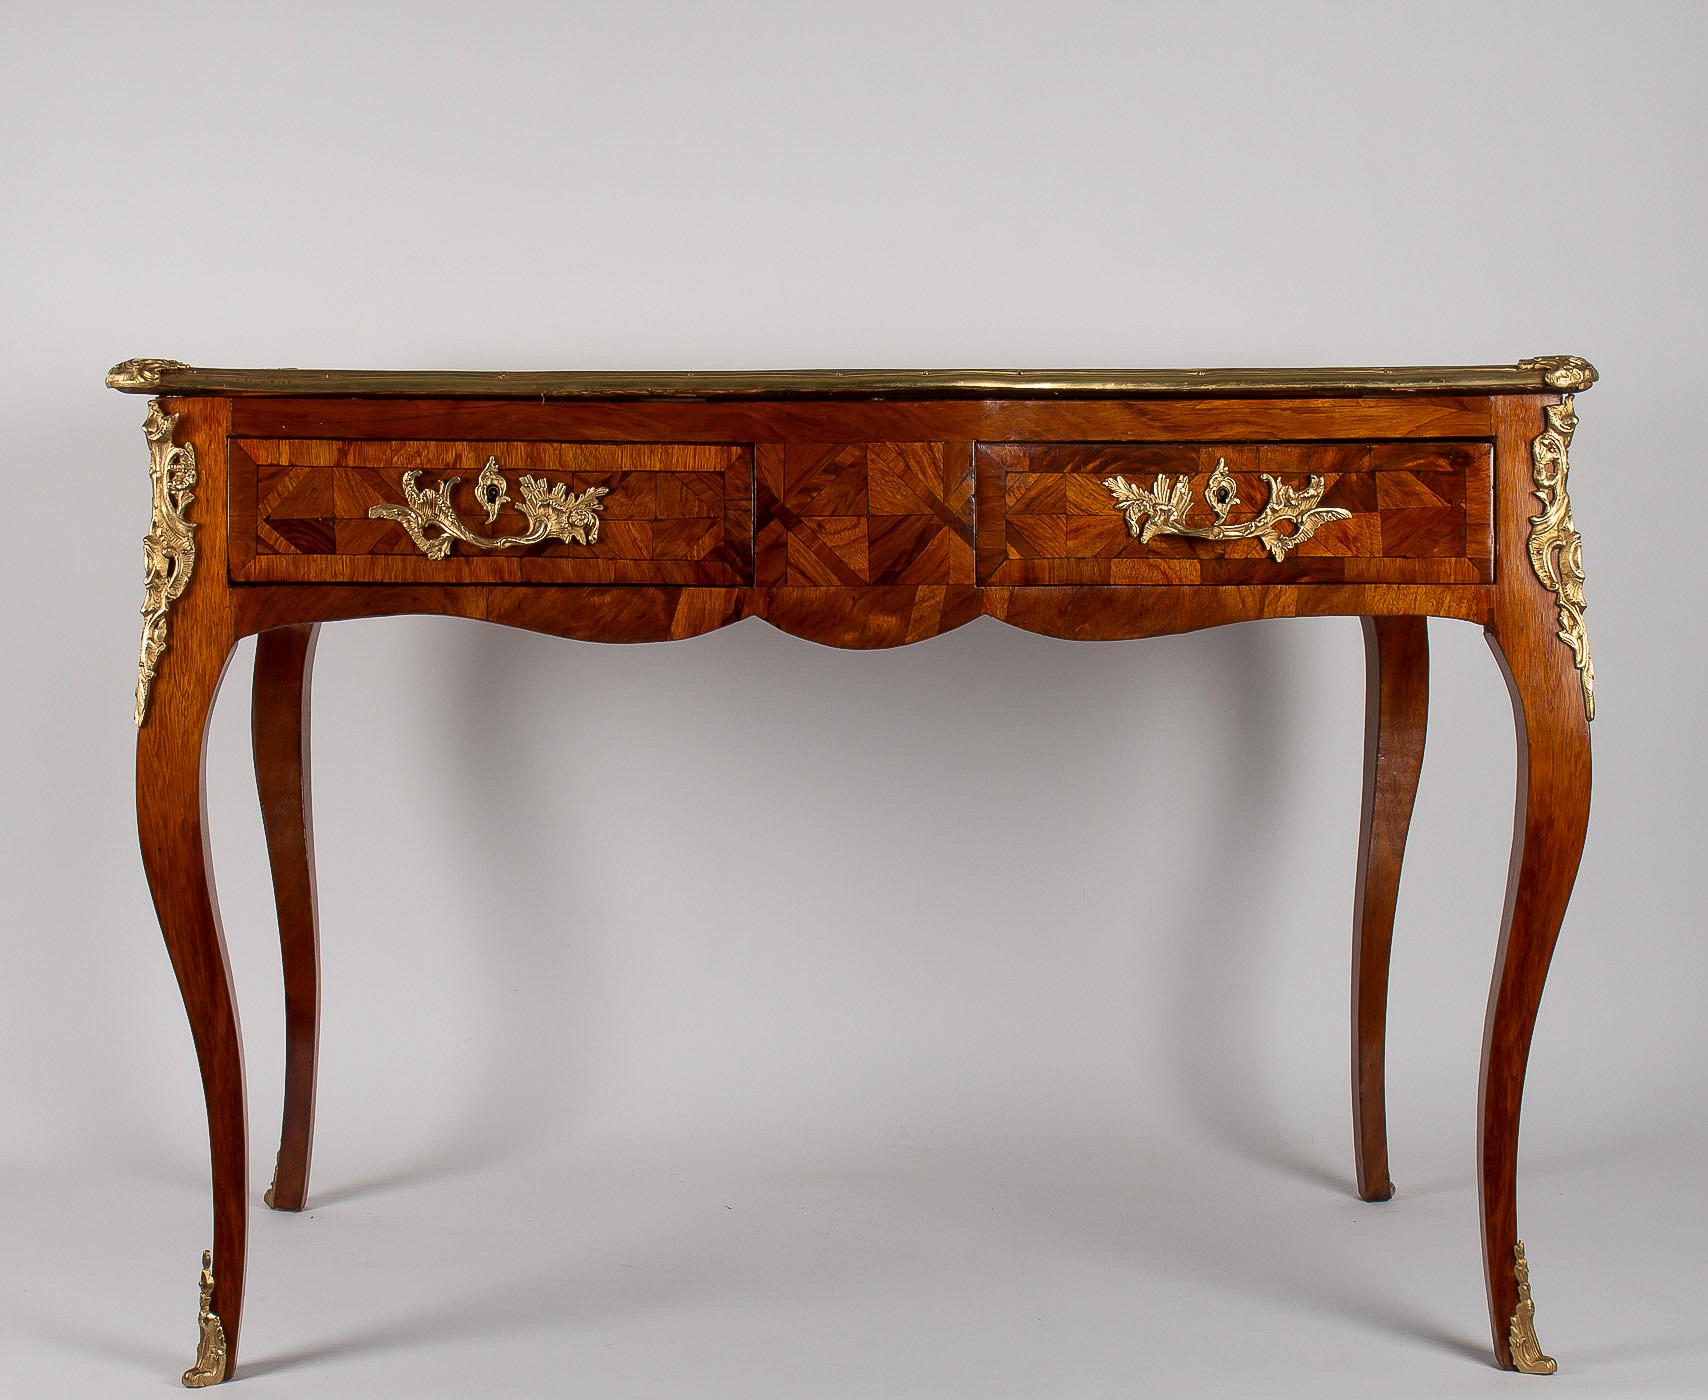 Small French Louis XV style marquetry bureau plat, circa 1820-1840.

Elegant and beautiful rectangular form small desk, called “Bureau Plat” in a Classic French Louis XV style, walnut, and veneer, raised on four cabriole legs, with two drawers and